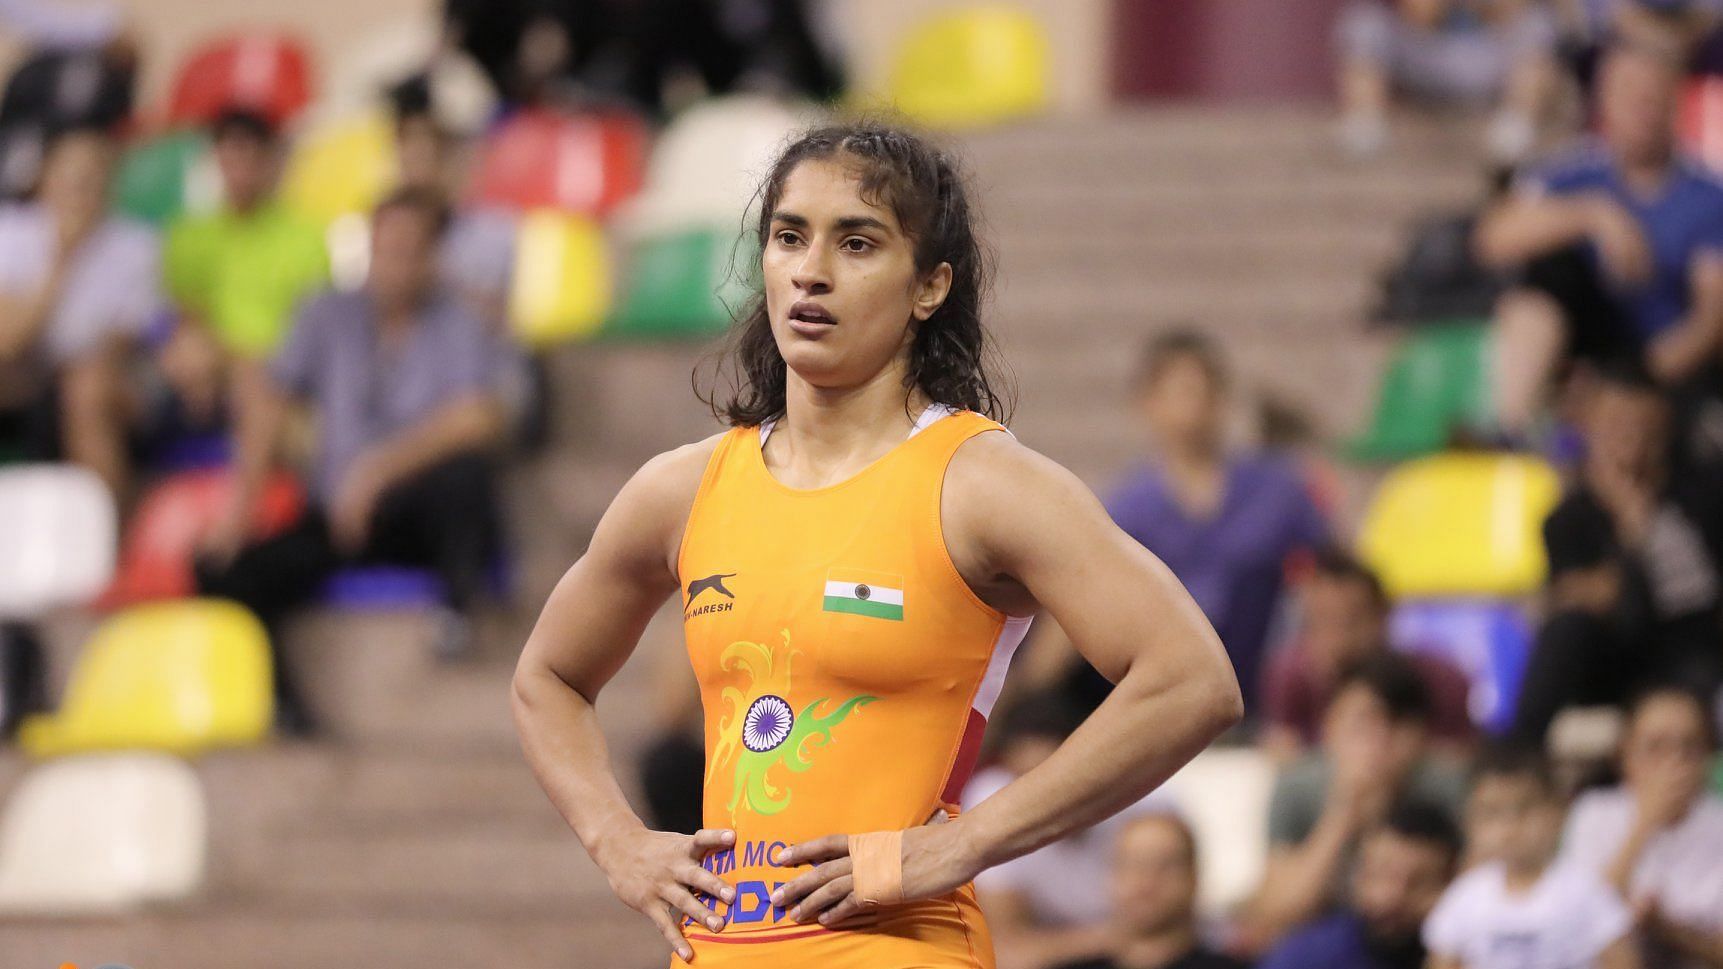 Vinesh Phogat has said the postponement of the Tokyo Olympics was her “worst fear”.